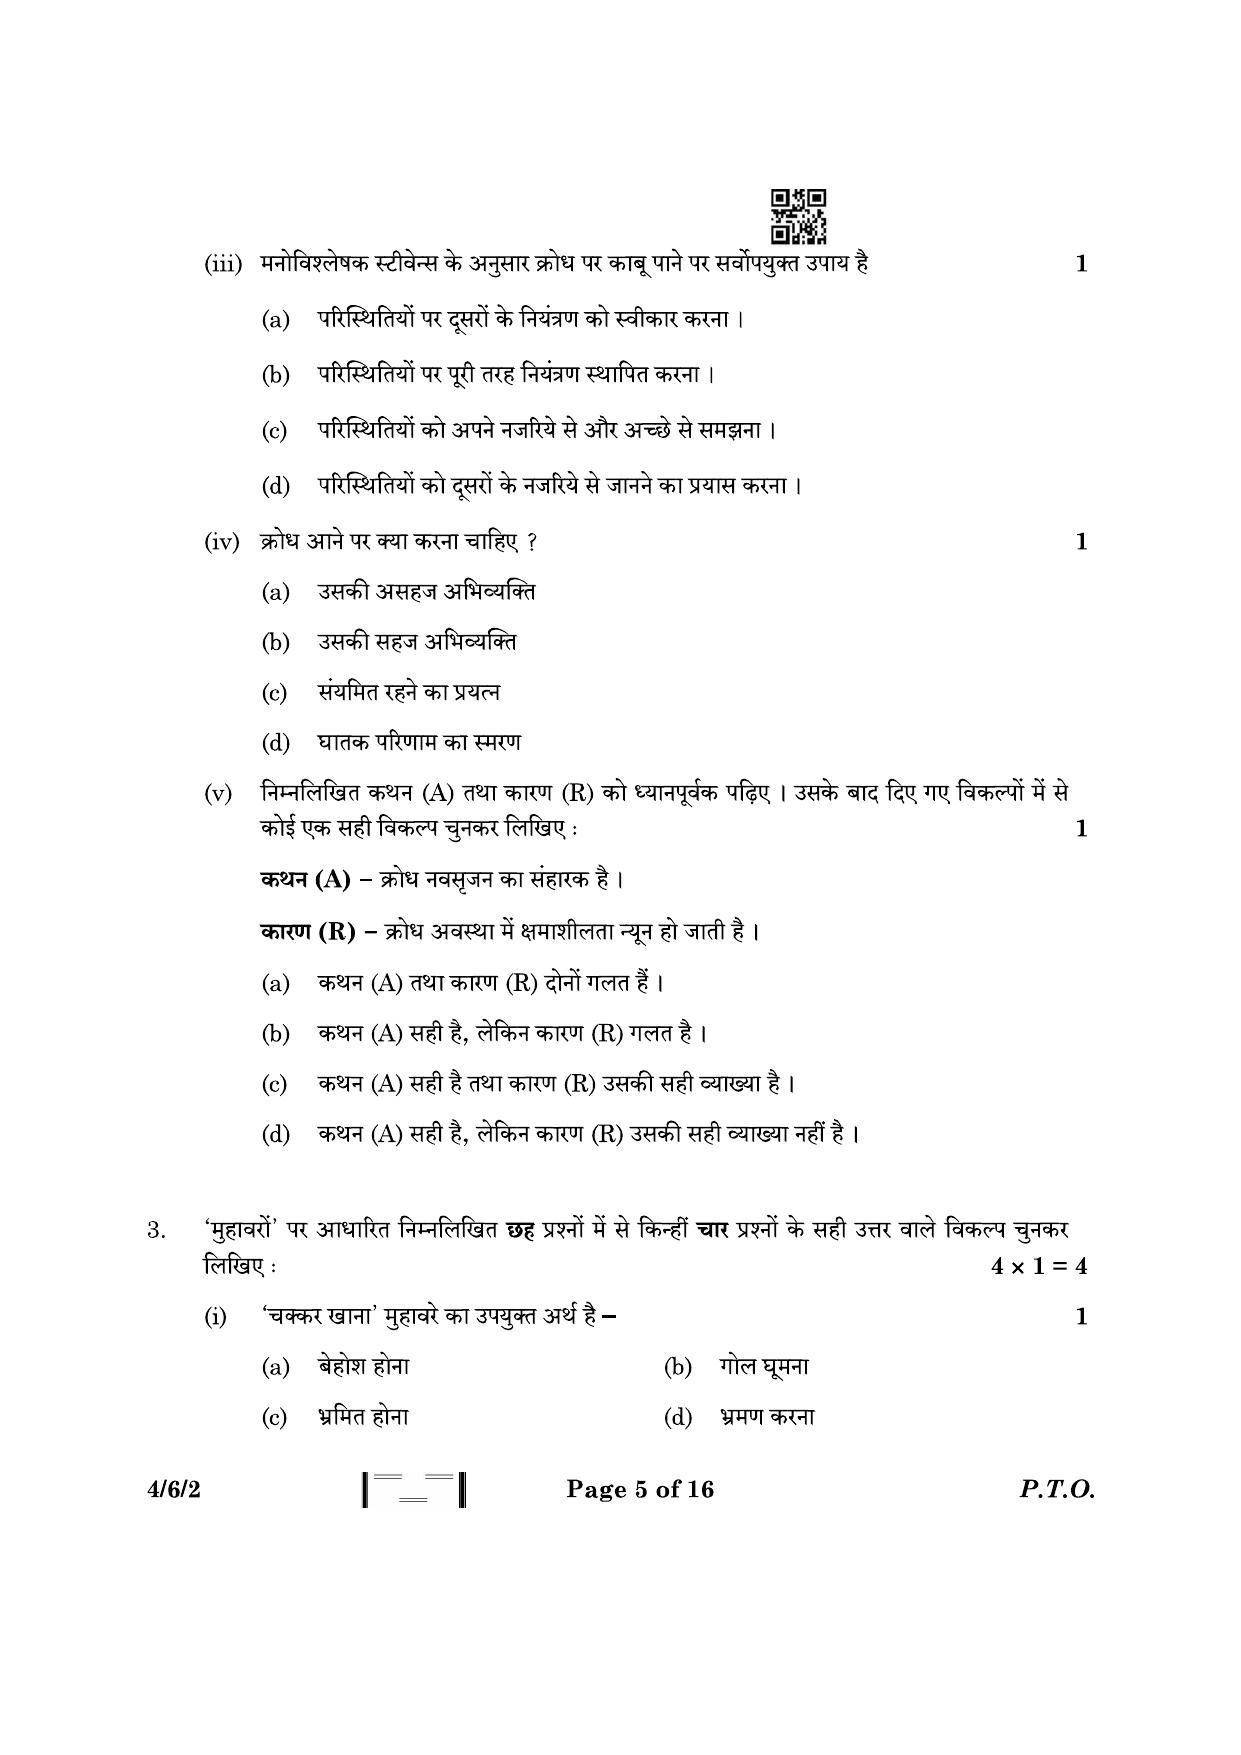 CBSE Class 10 4-6-2 Hindi B 2023 Question Paper - Page 5